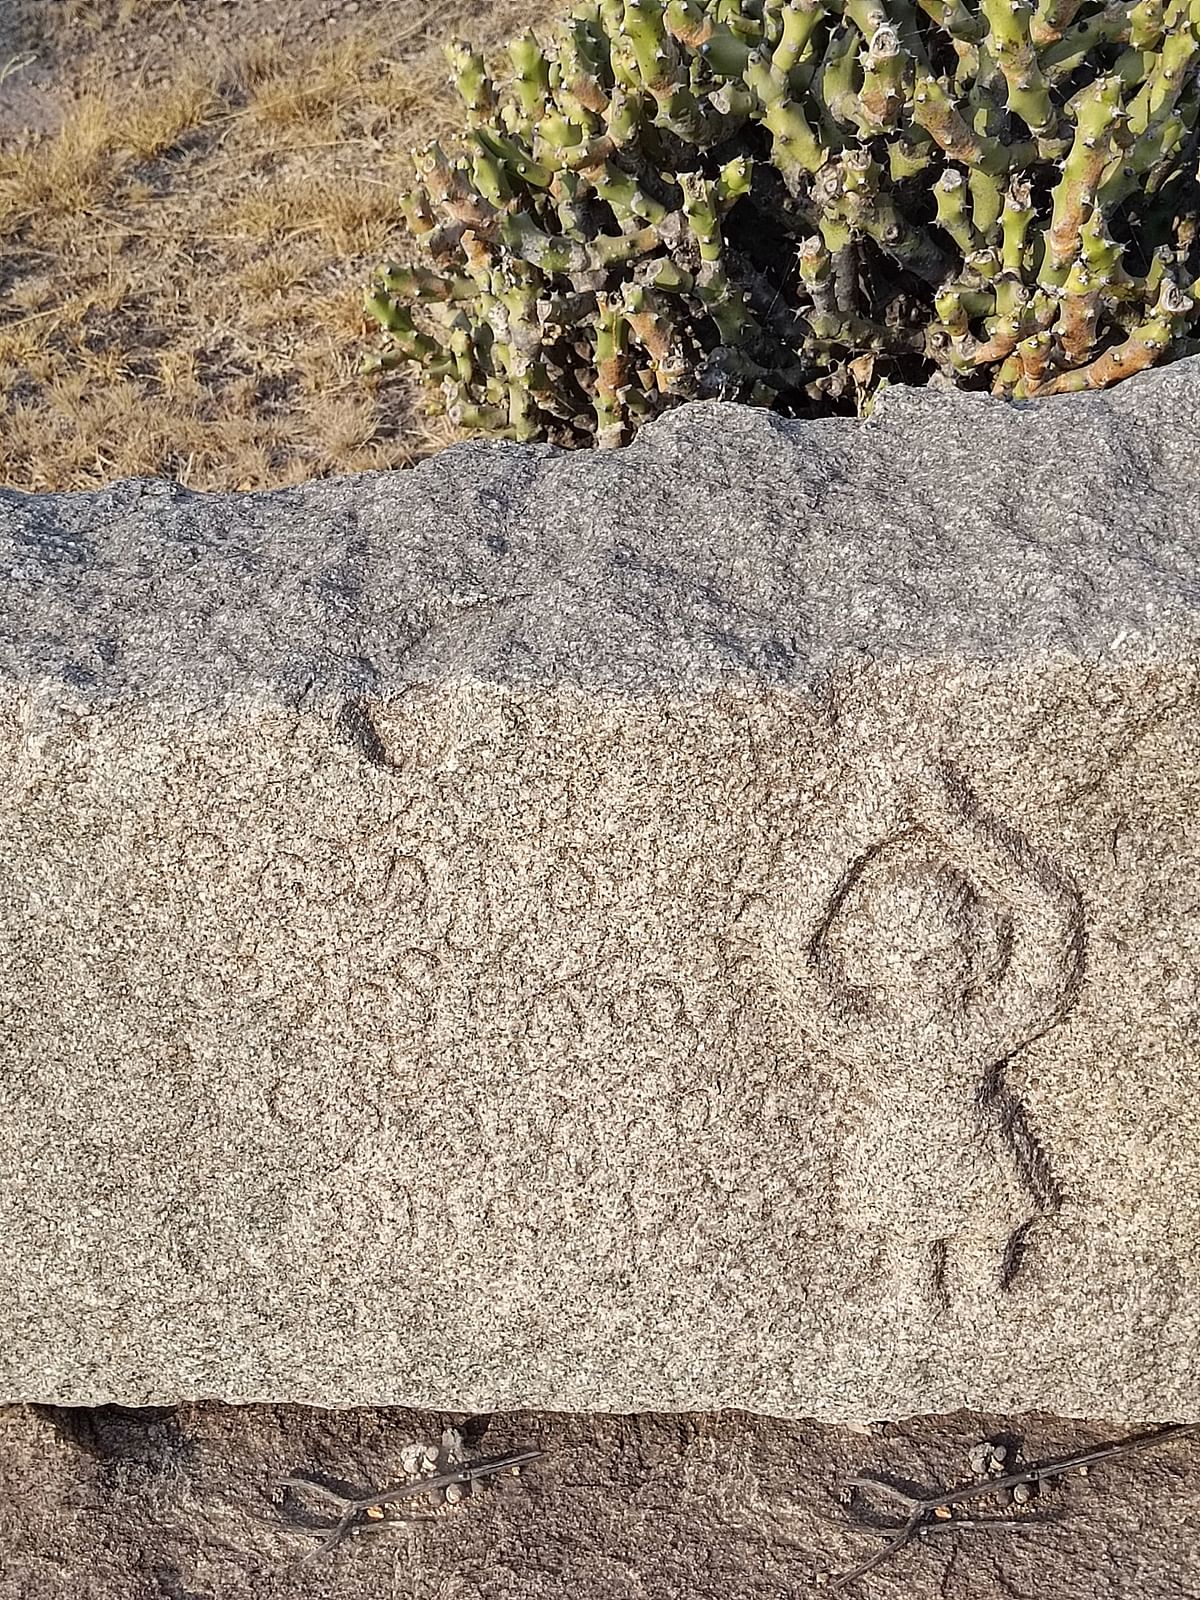 A carving in stone found on the hill.